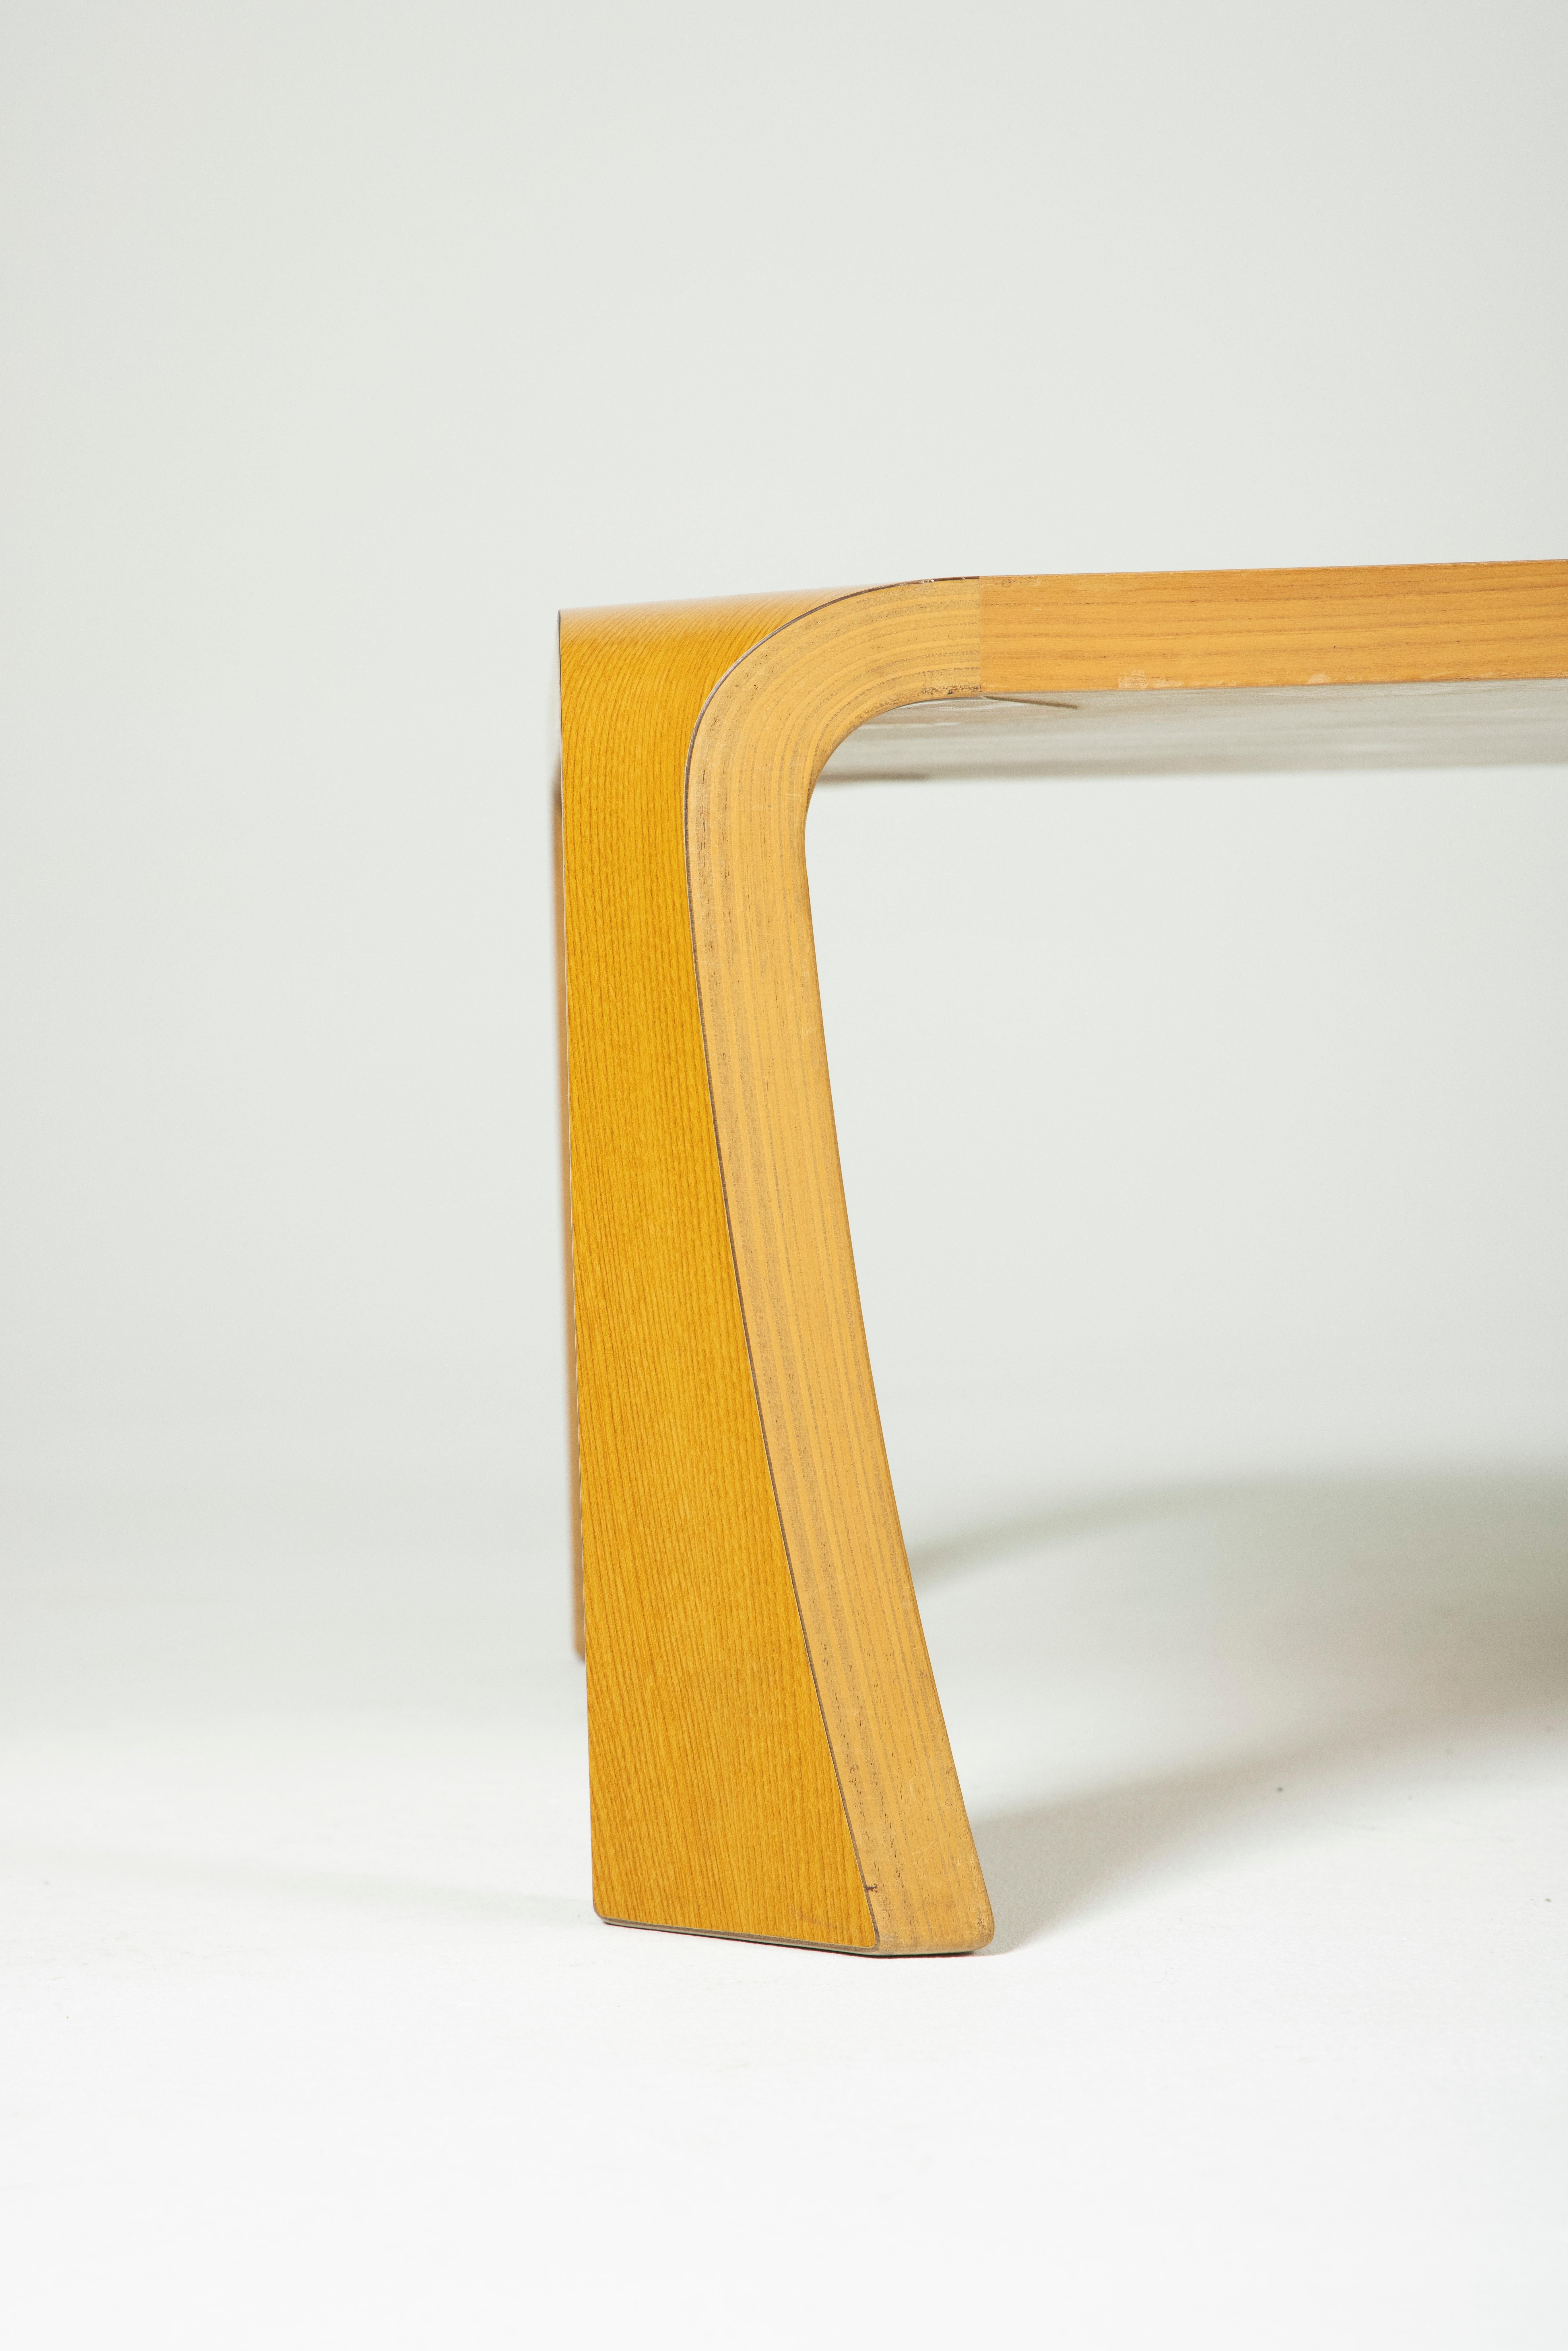 Bentwood Saburo Inui wooden coffee table For Sale